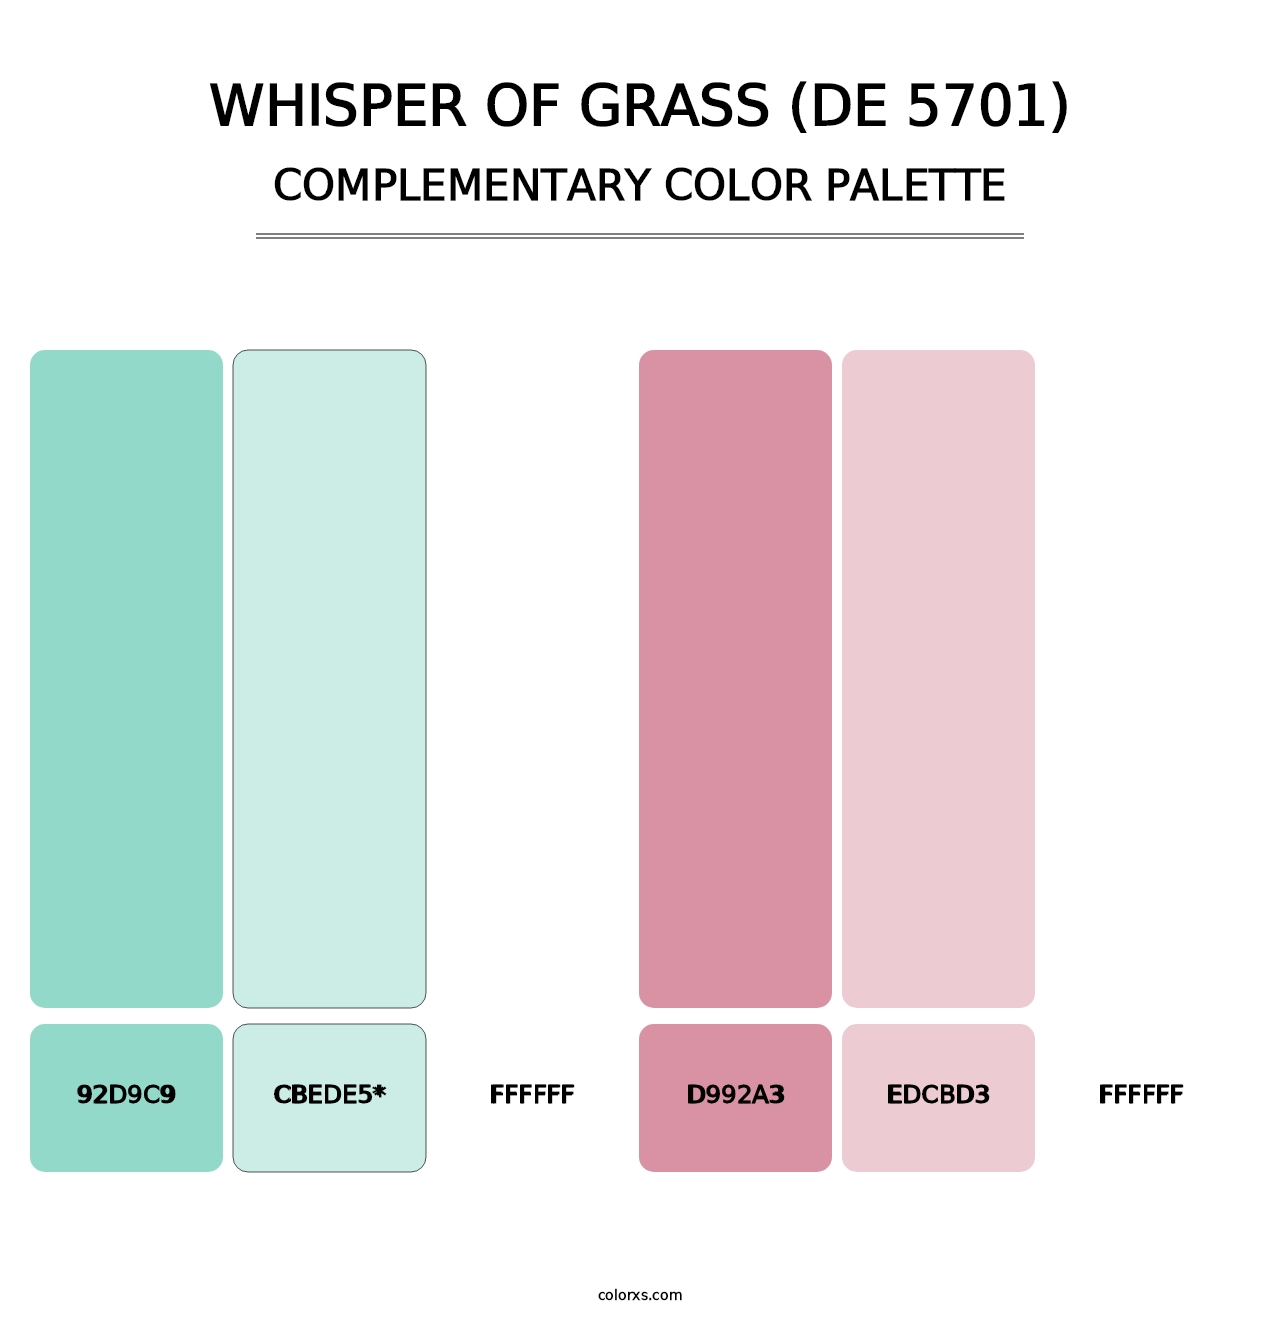 Whisper of Grass (DE 5701) - Complementary Color Palette